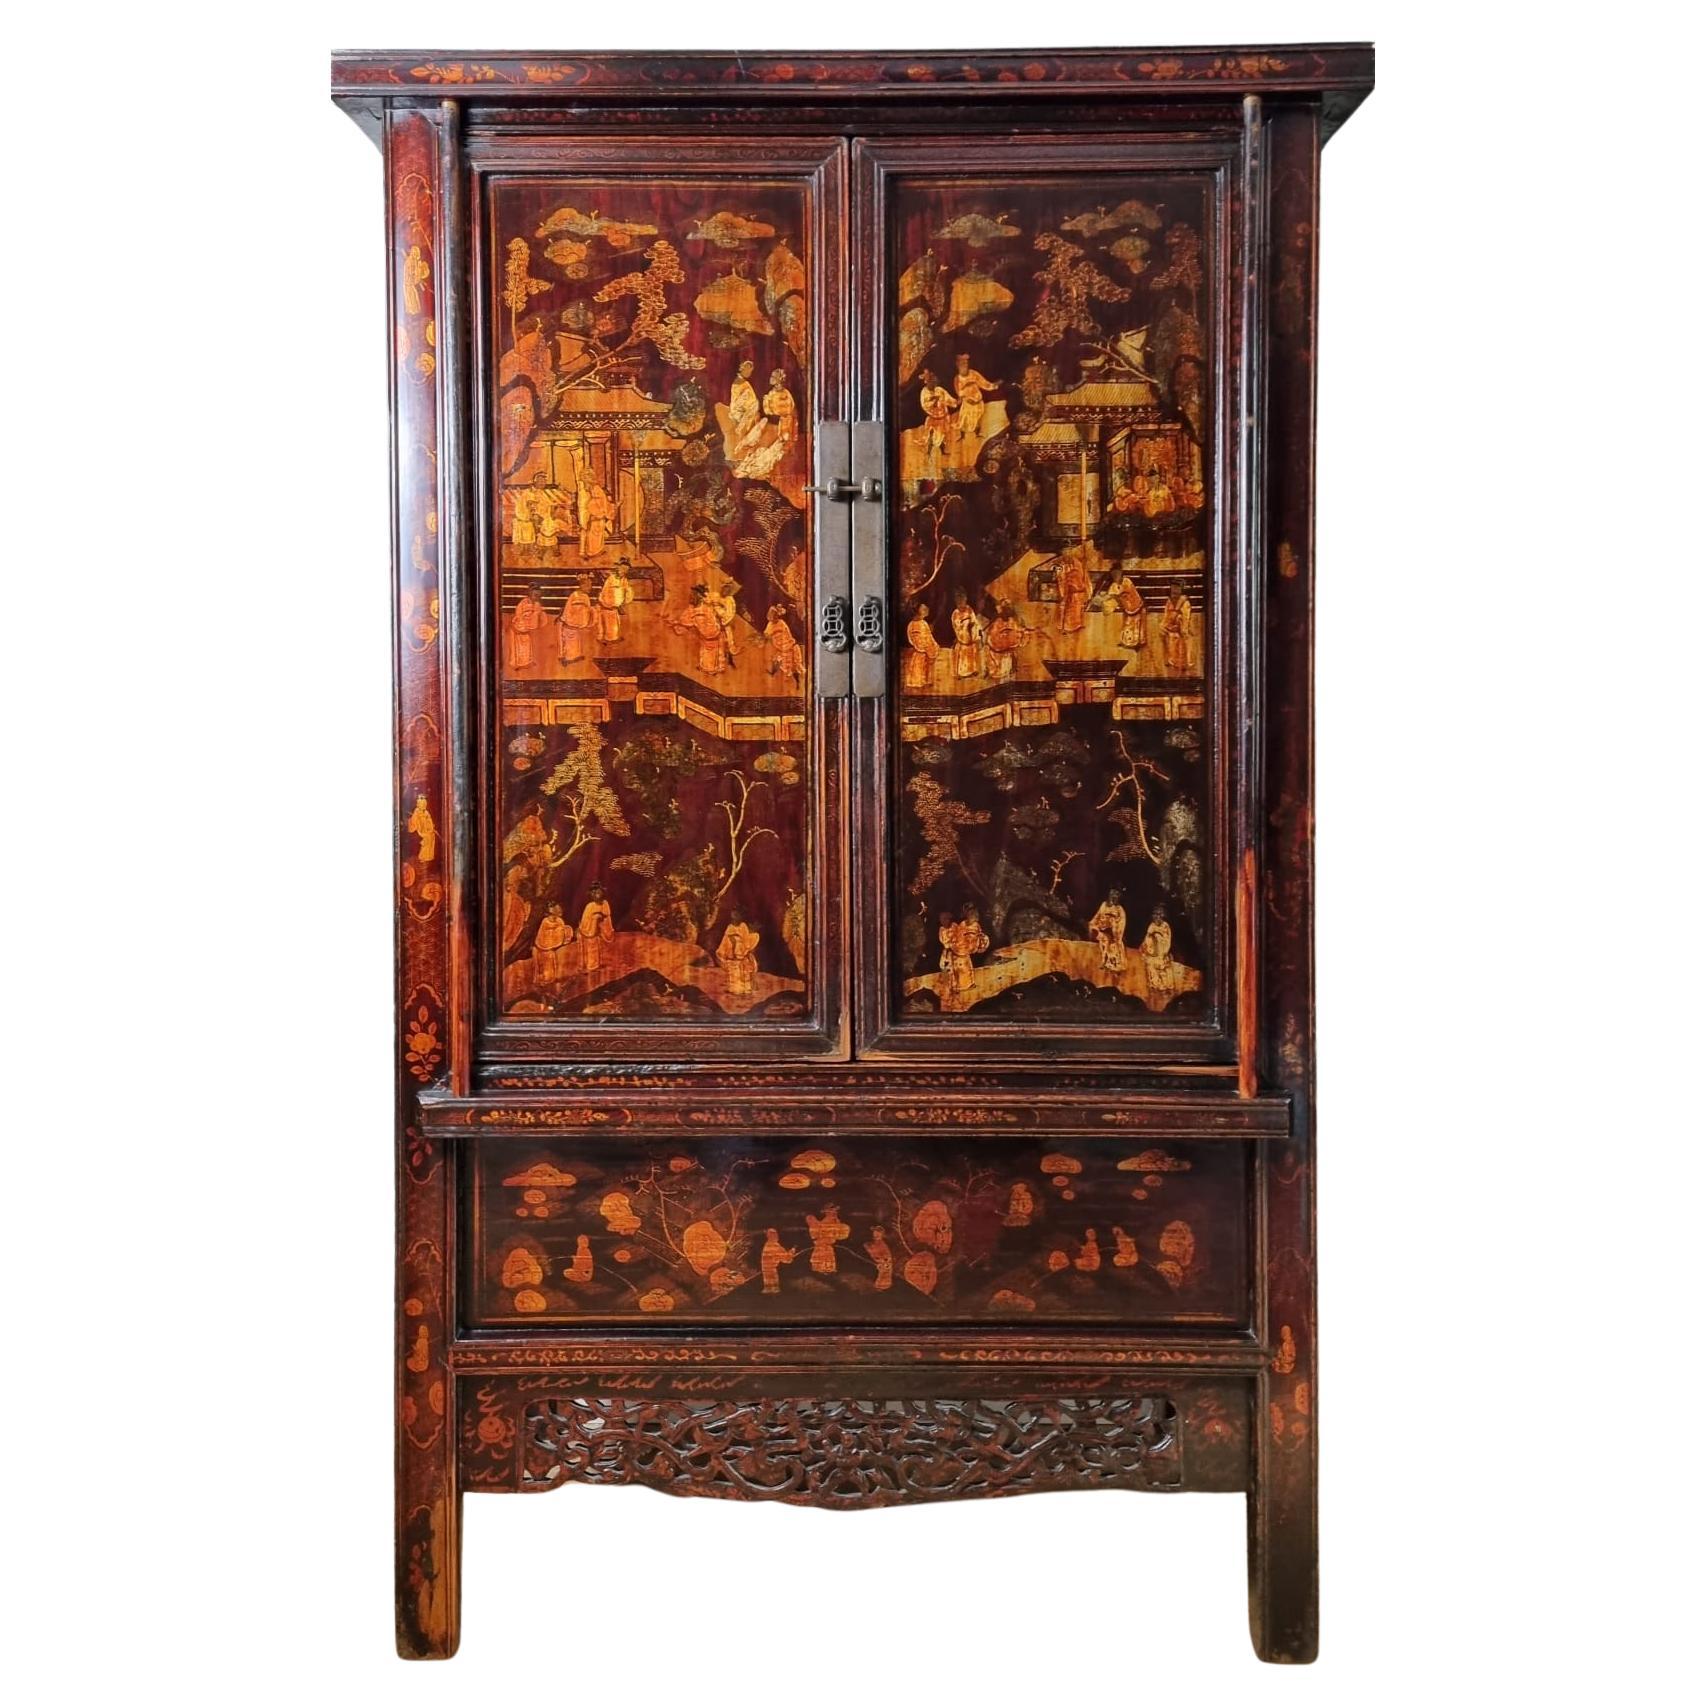 18th Century Chinese Lacquered Cabinet - Qing Dynasty